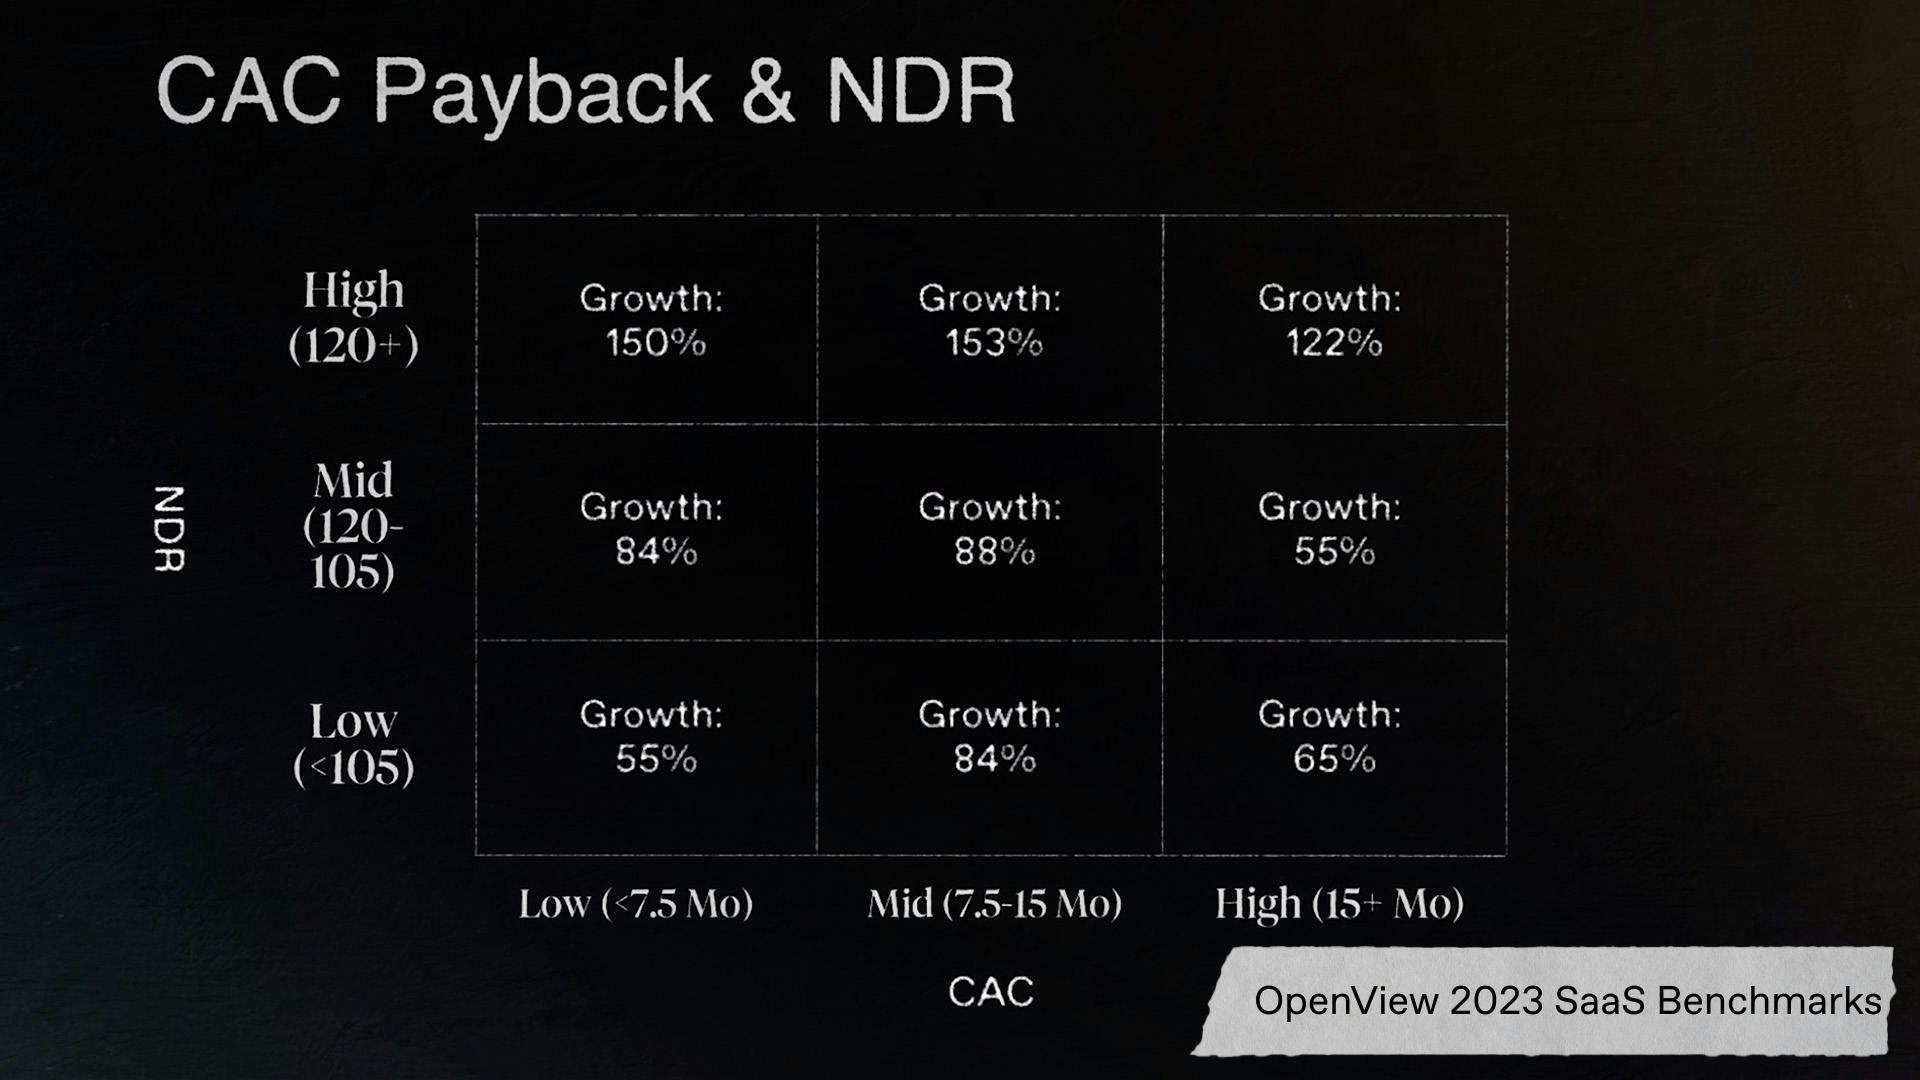 CAC Payback and NDR Benchmarks from OpenView's 2023 SaaS Benchmark Report